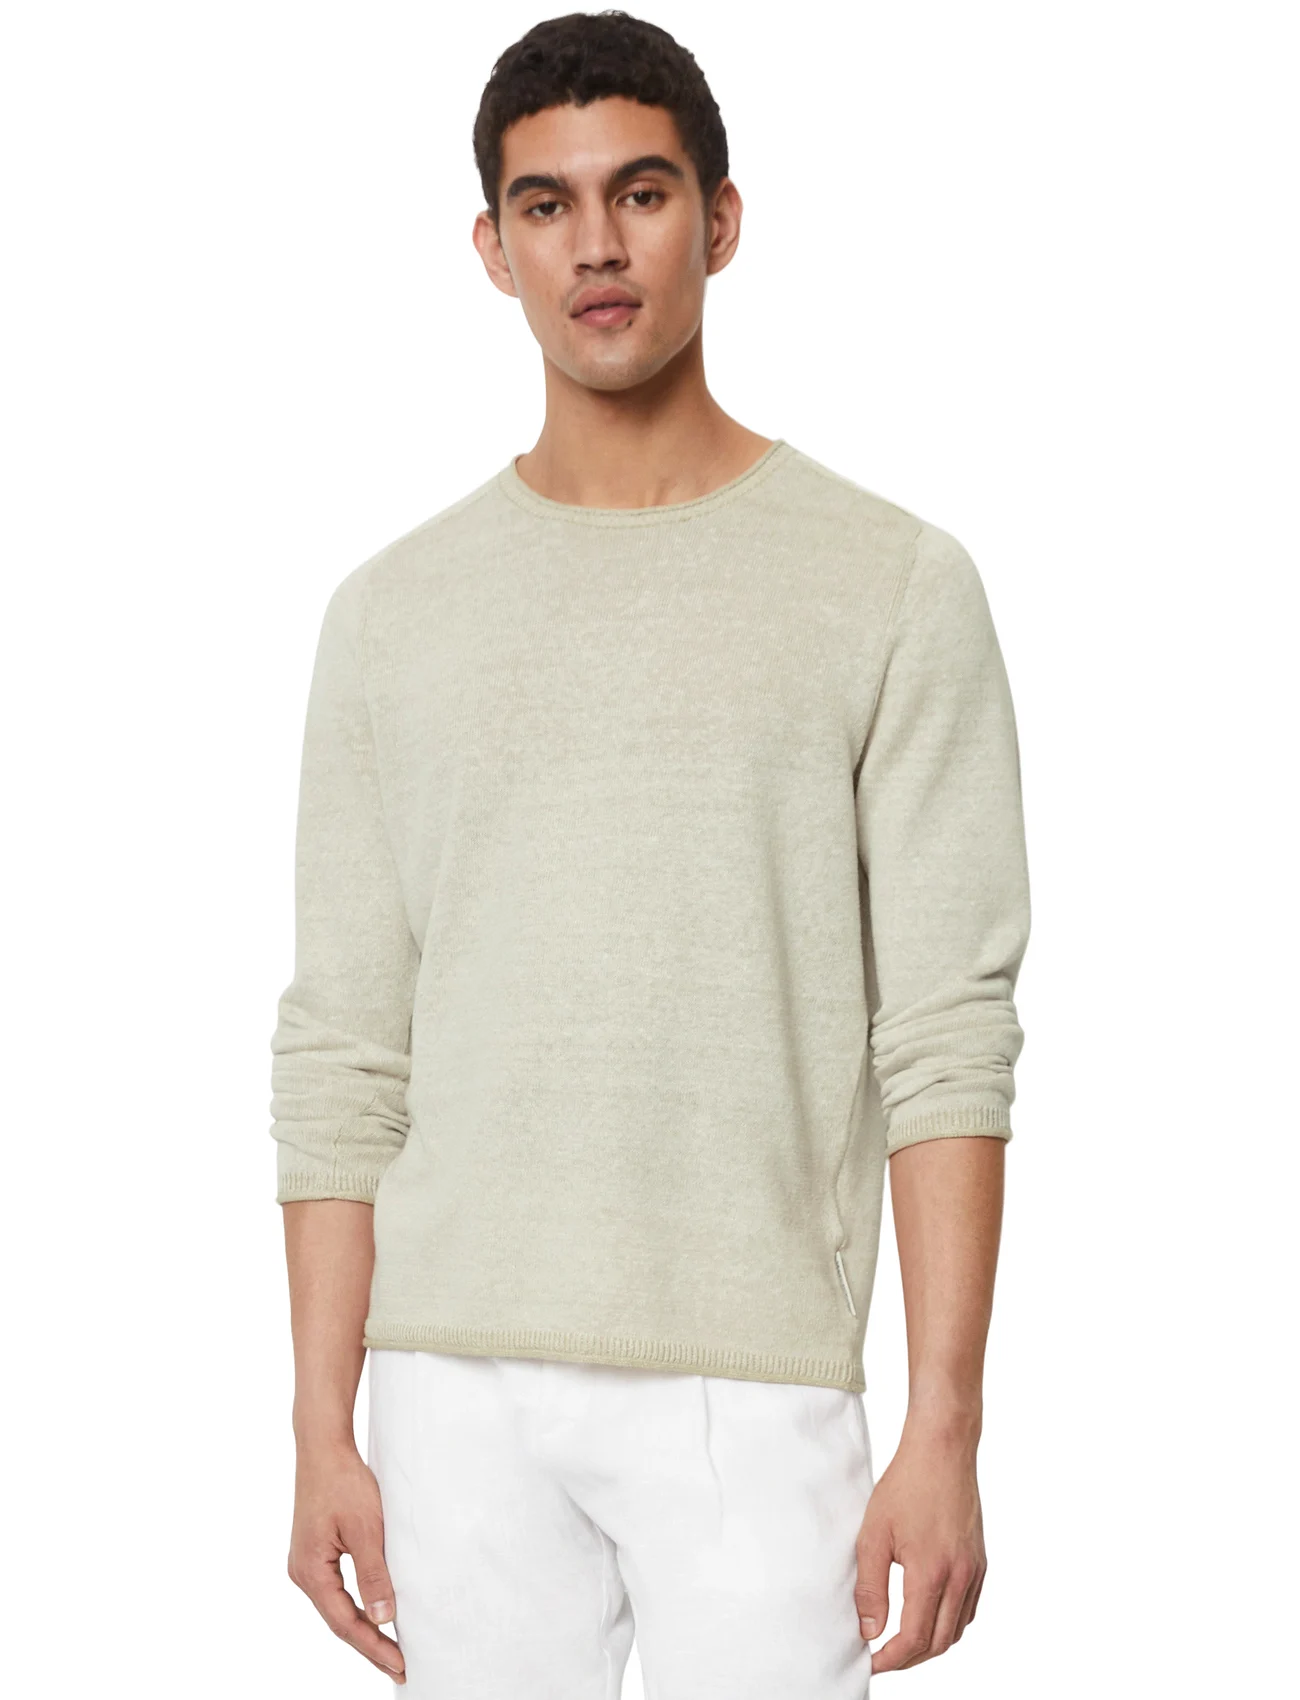 Marc O'Polo - PULLOVER LONG SLEEVE - rund hals - white cotton - 1